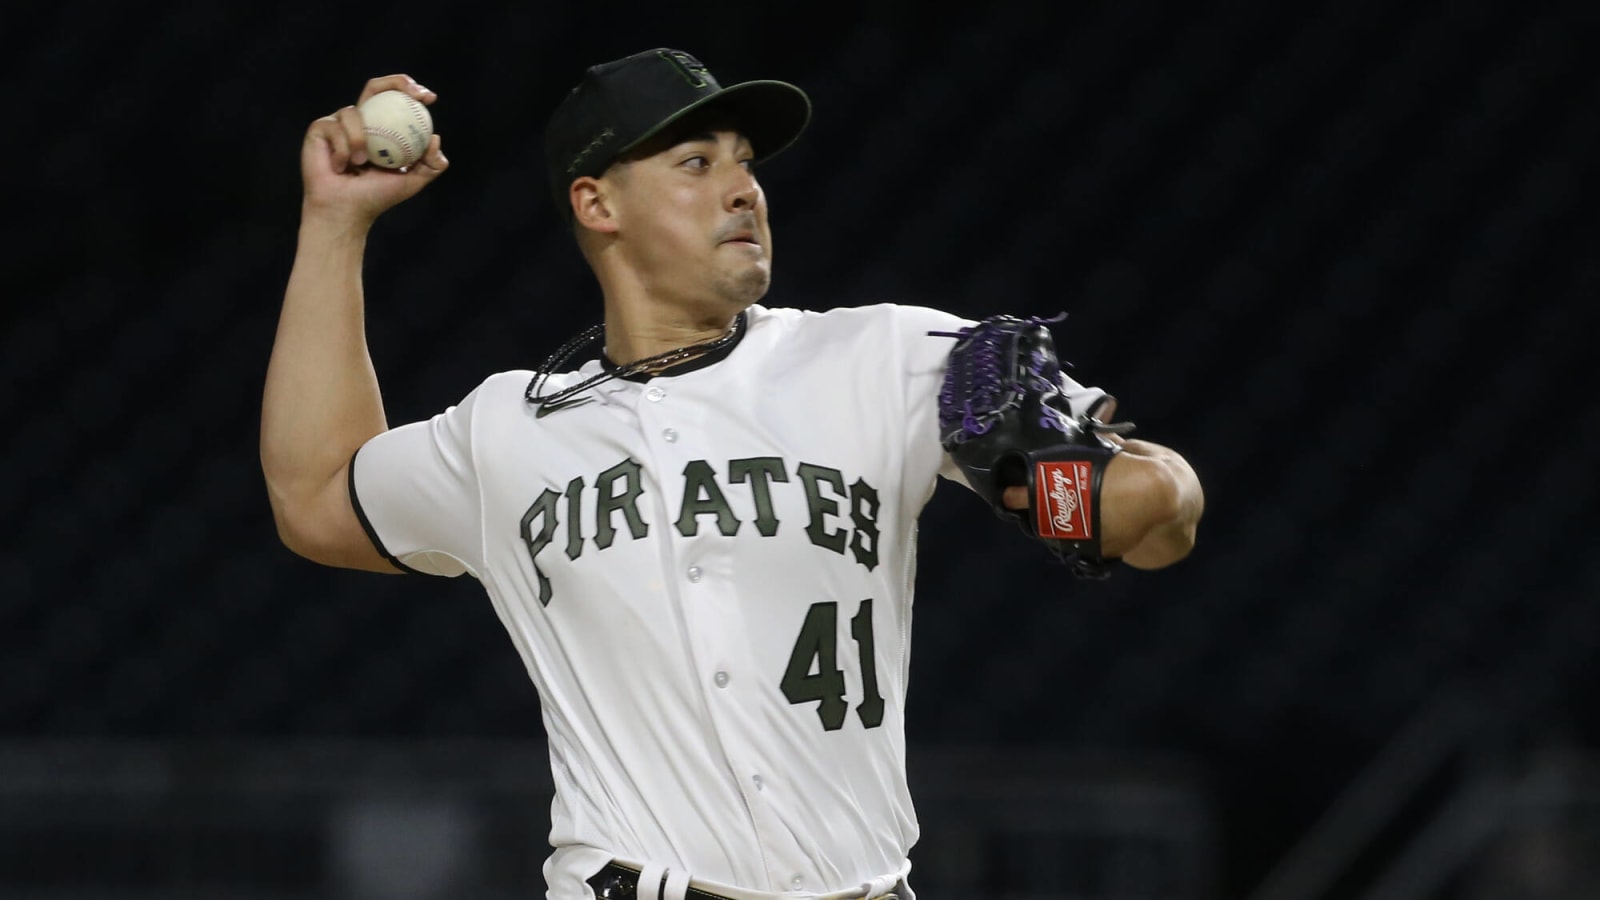 Pirates Trade Robert Stephenson to Rays For Minor League Shortstop